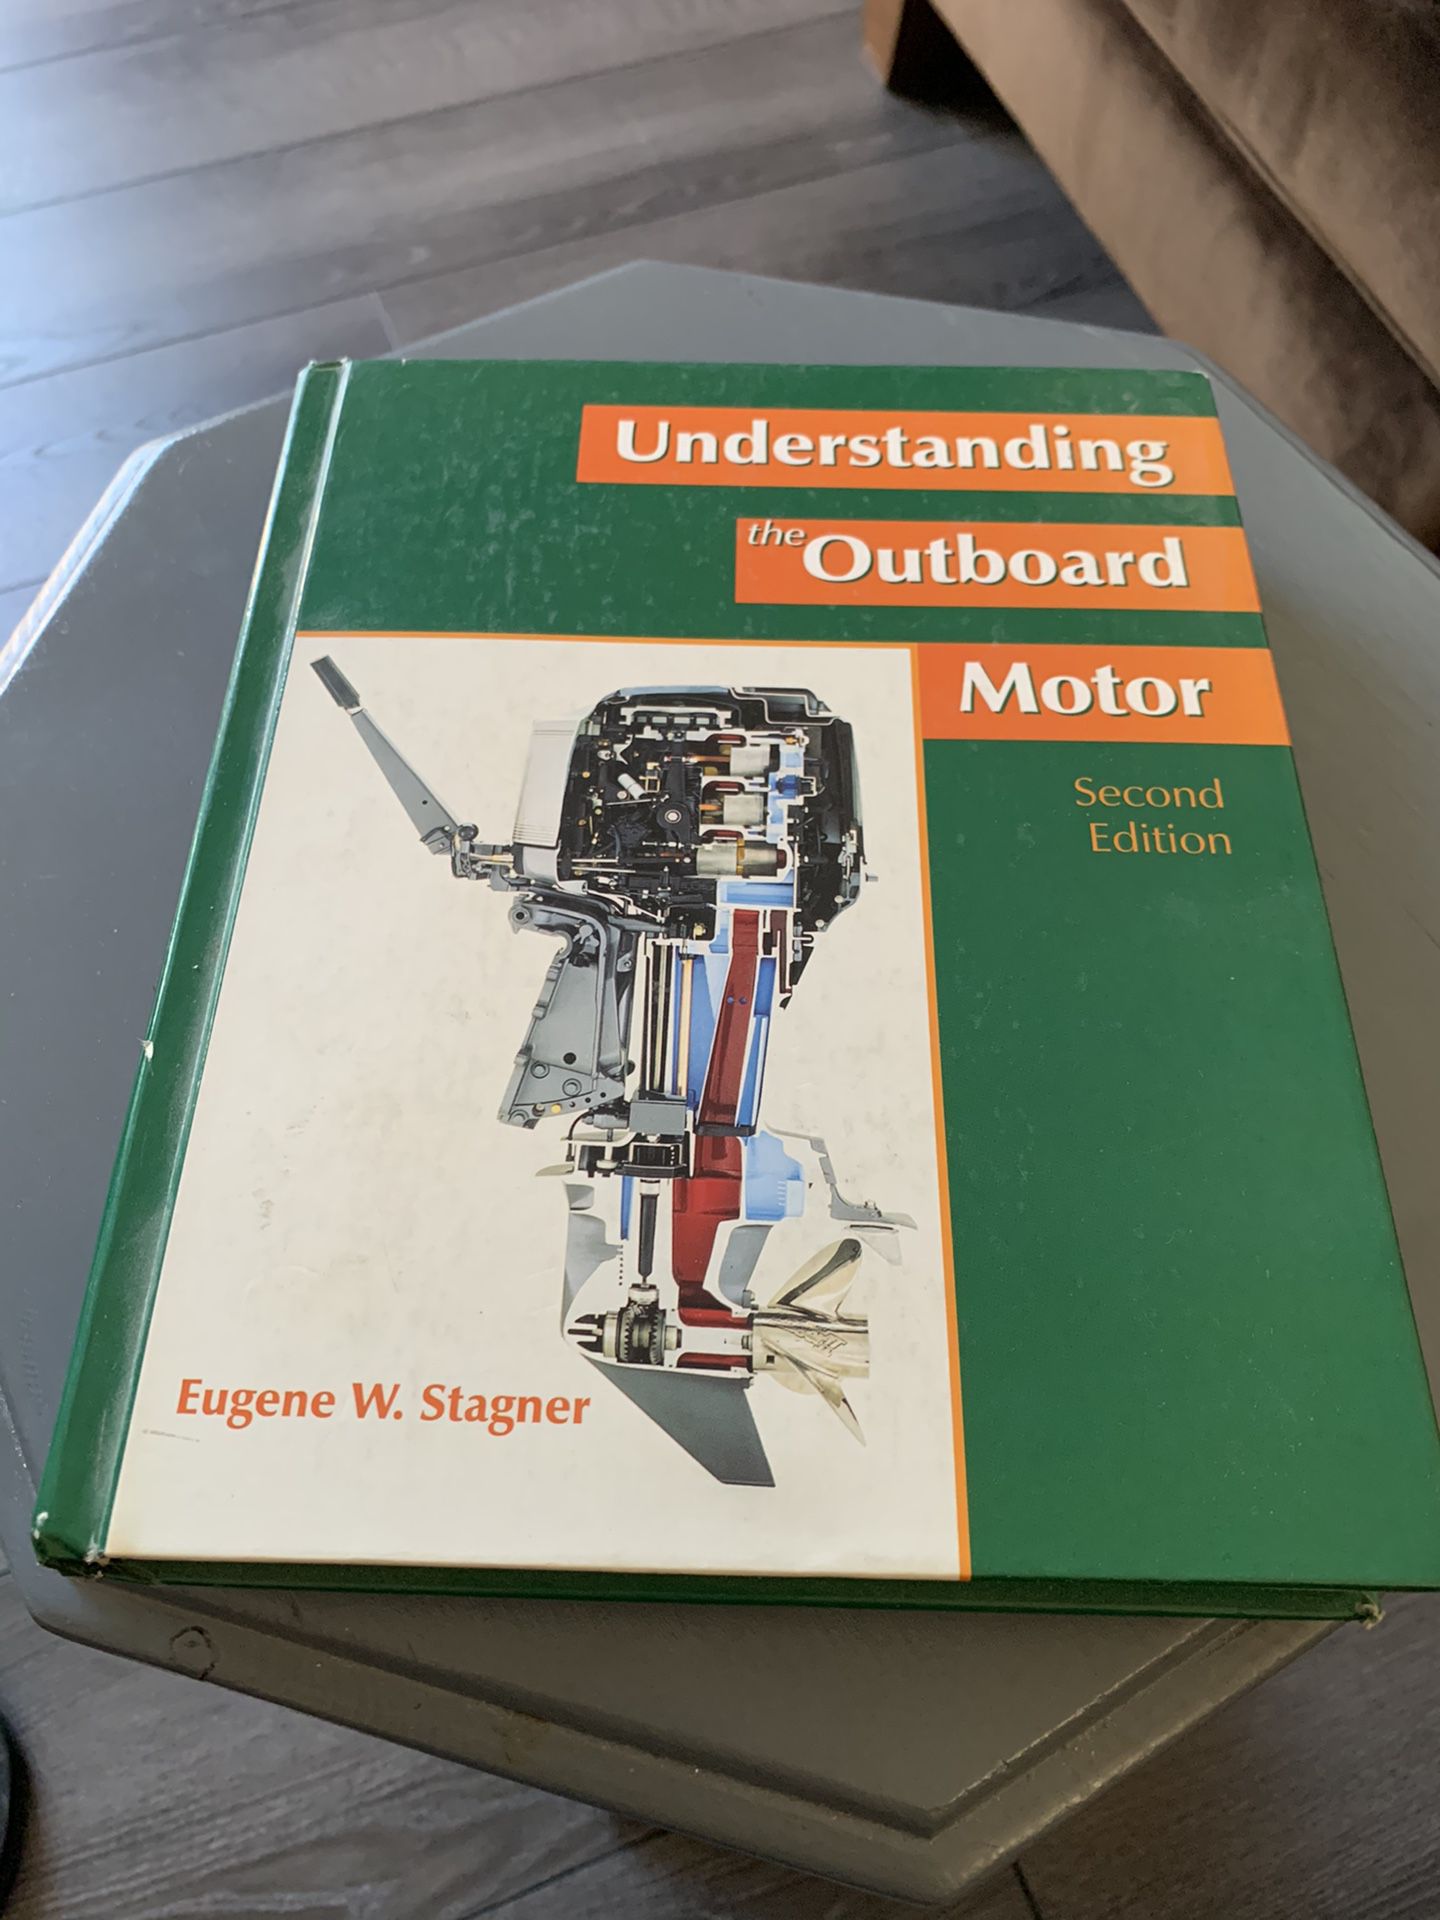 Understanding the outboard motor (second edition)